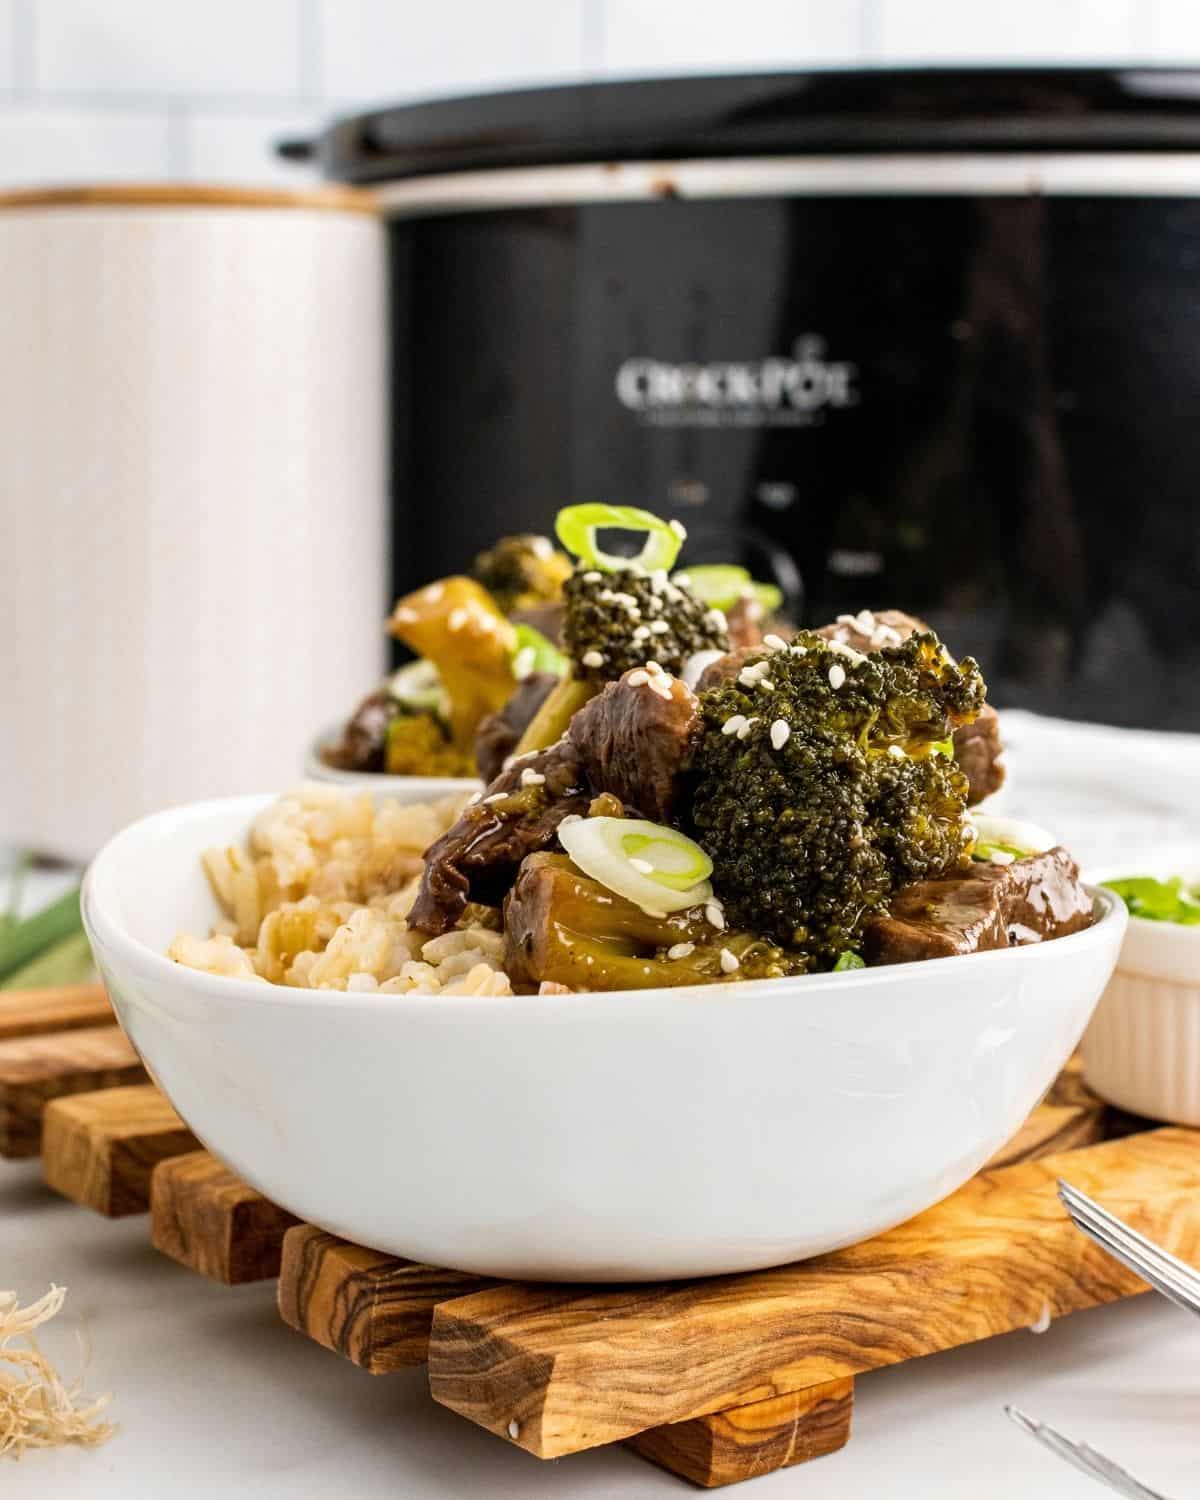 A closeup picture of beef and broccoli in a white bowl with a crockpot in the background.